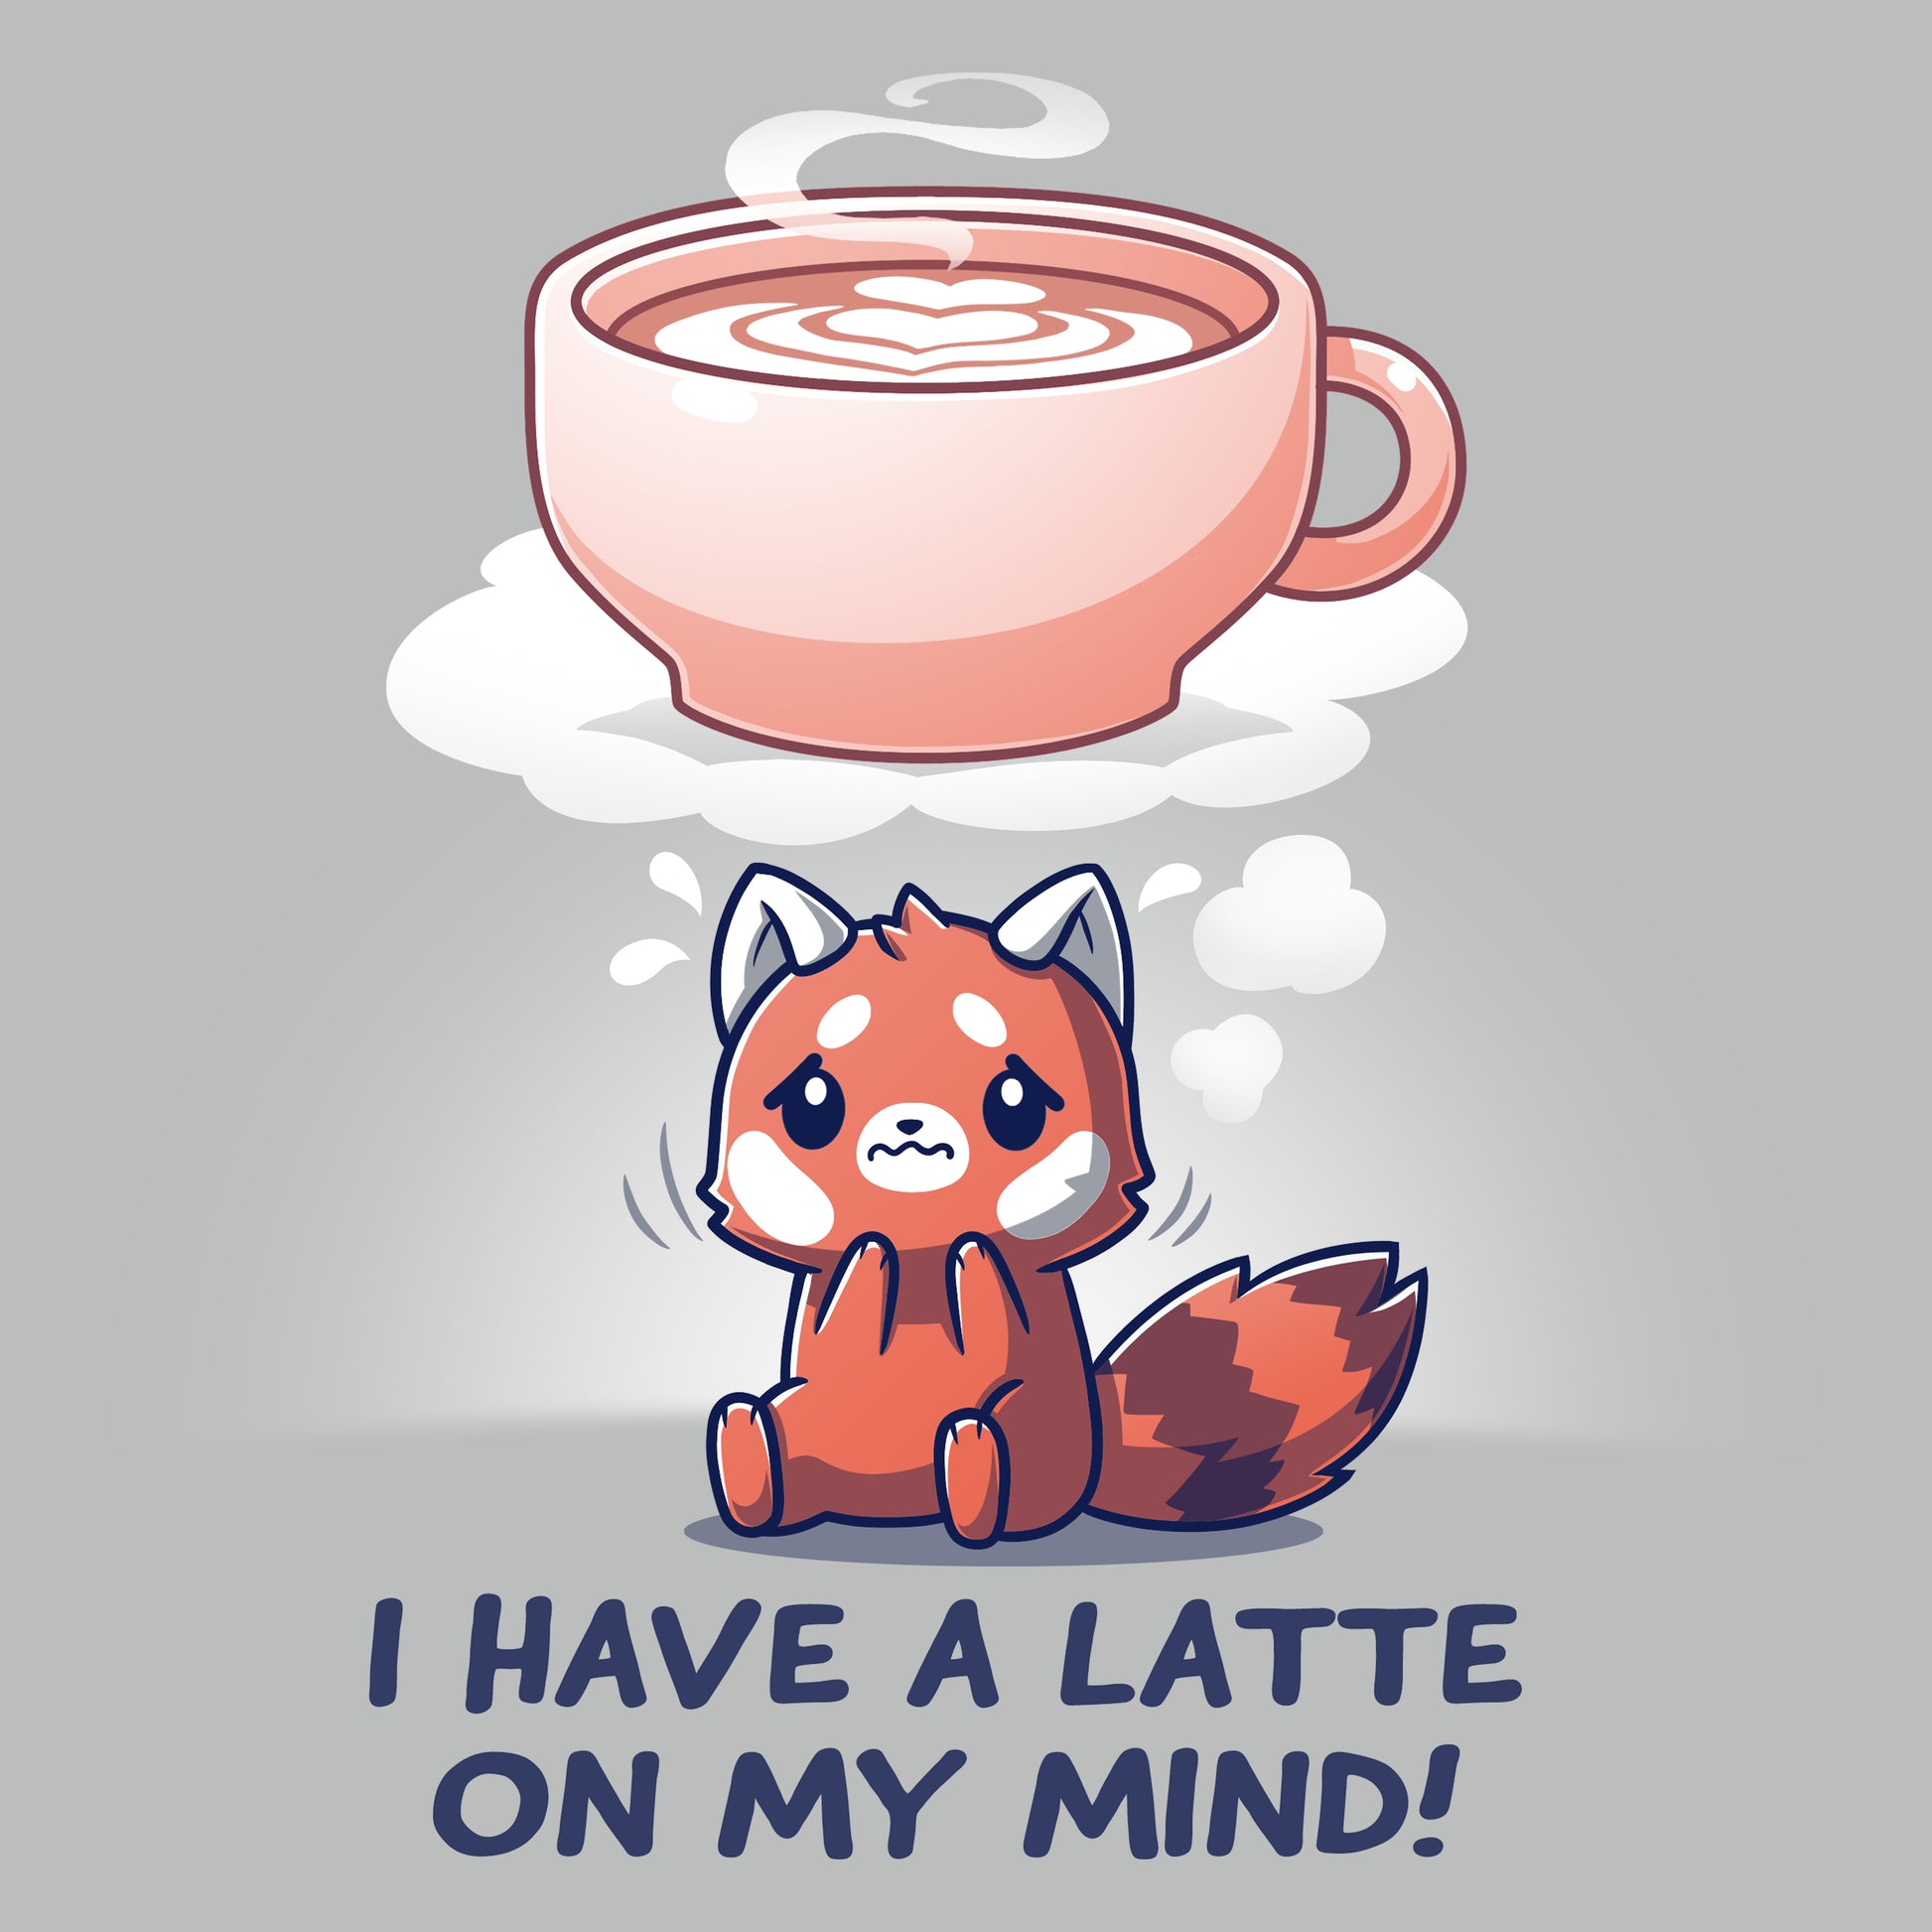 A cute cartoon fox with a thought bubble showing a latte and the text "I have a latte on my mind!" adorns this super soft ringspun cotton unisex tee by monsterdigital called I Have a Latte on My Mind.